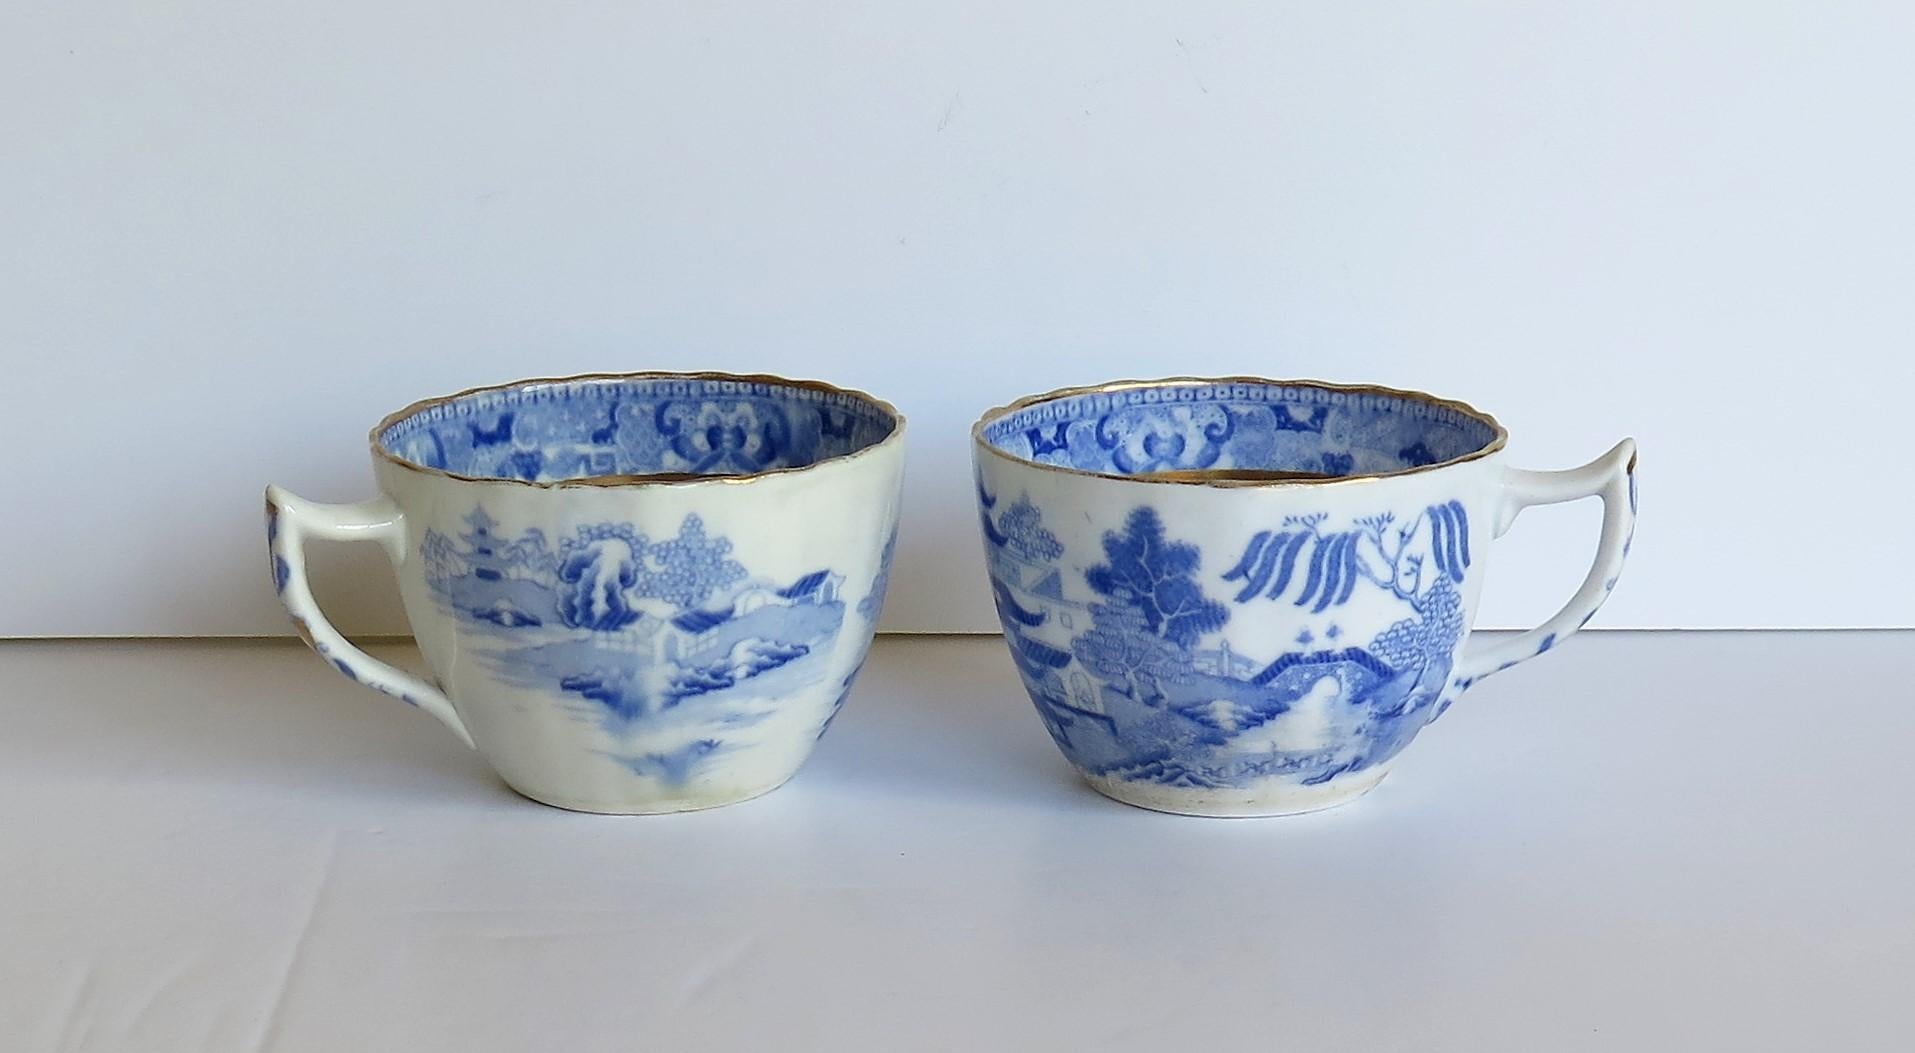 These are pair of porcelain blue and white, hand gilded tea cups made by Miles Mason (Mason's), Staffordshire Potteries, England around the turn of the 18th century, circa 1805. 

The cups are well potted with a bute shape, slightly fluted